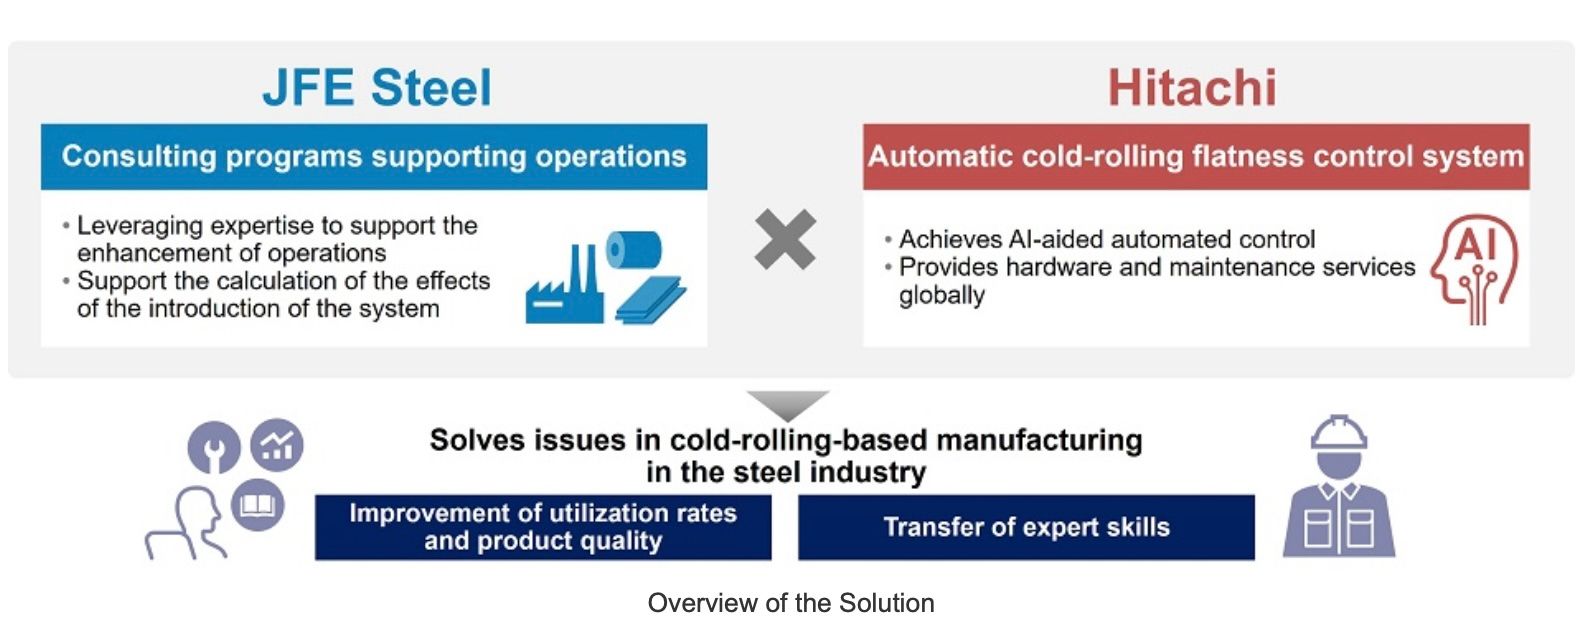 JFE Steel and Hitachi Jointly Started Providing Solutions for the Steel Industry